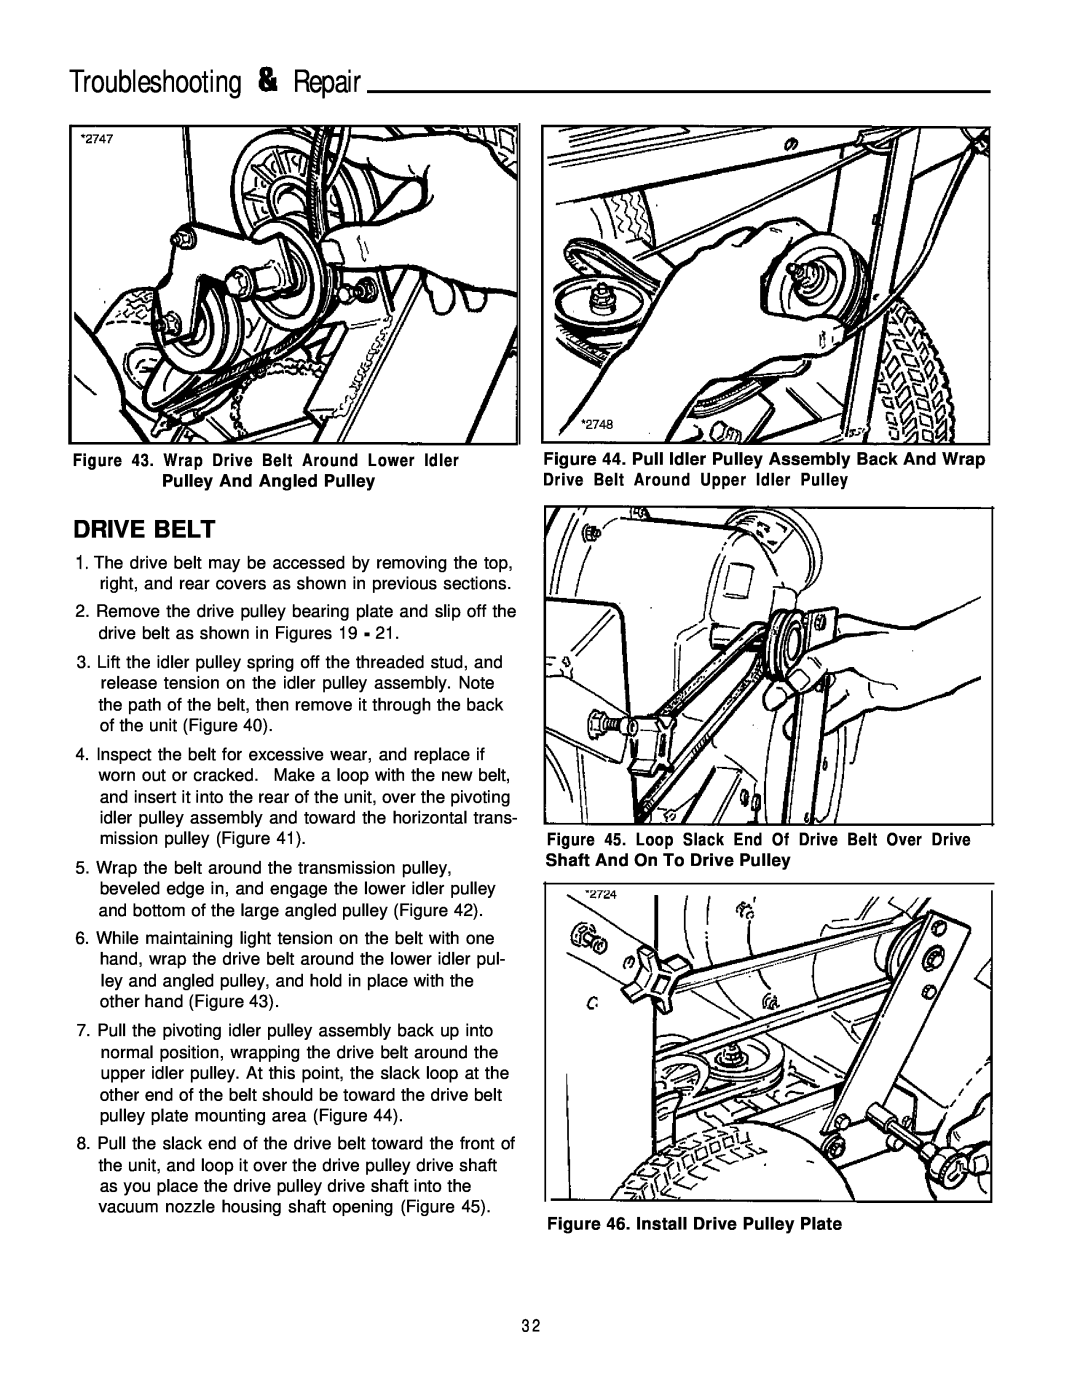 Simplicity 8/25, 6/25 manual Troubleshooting & Repair, Wrap Drive Belt Around Lower Idler, Pulley And Angled Pulley 